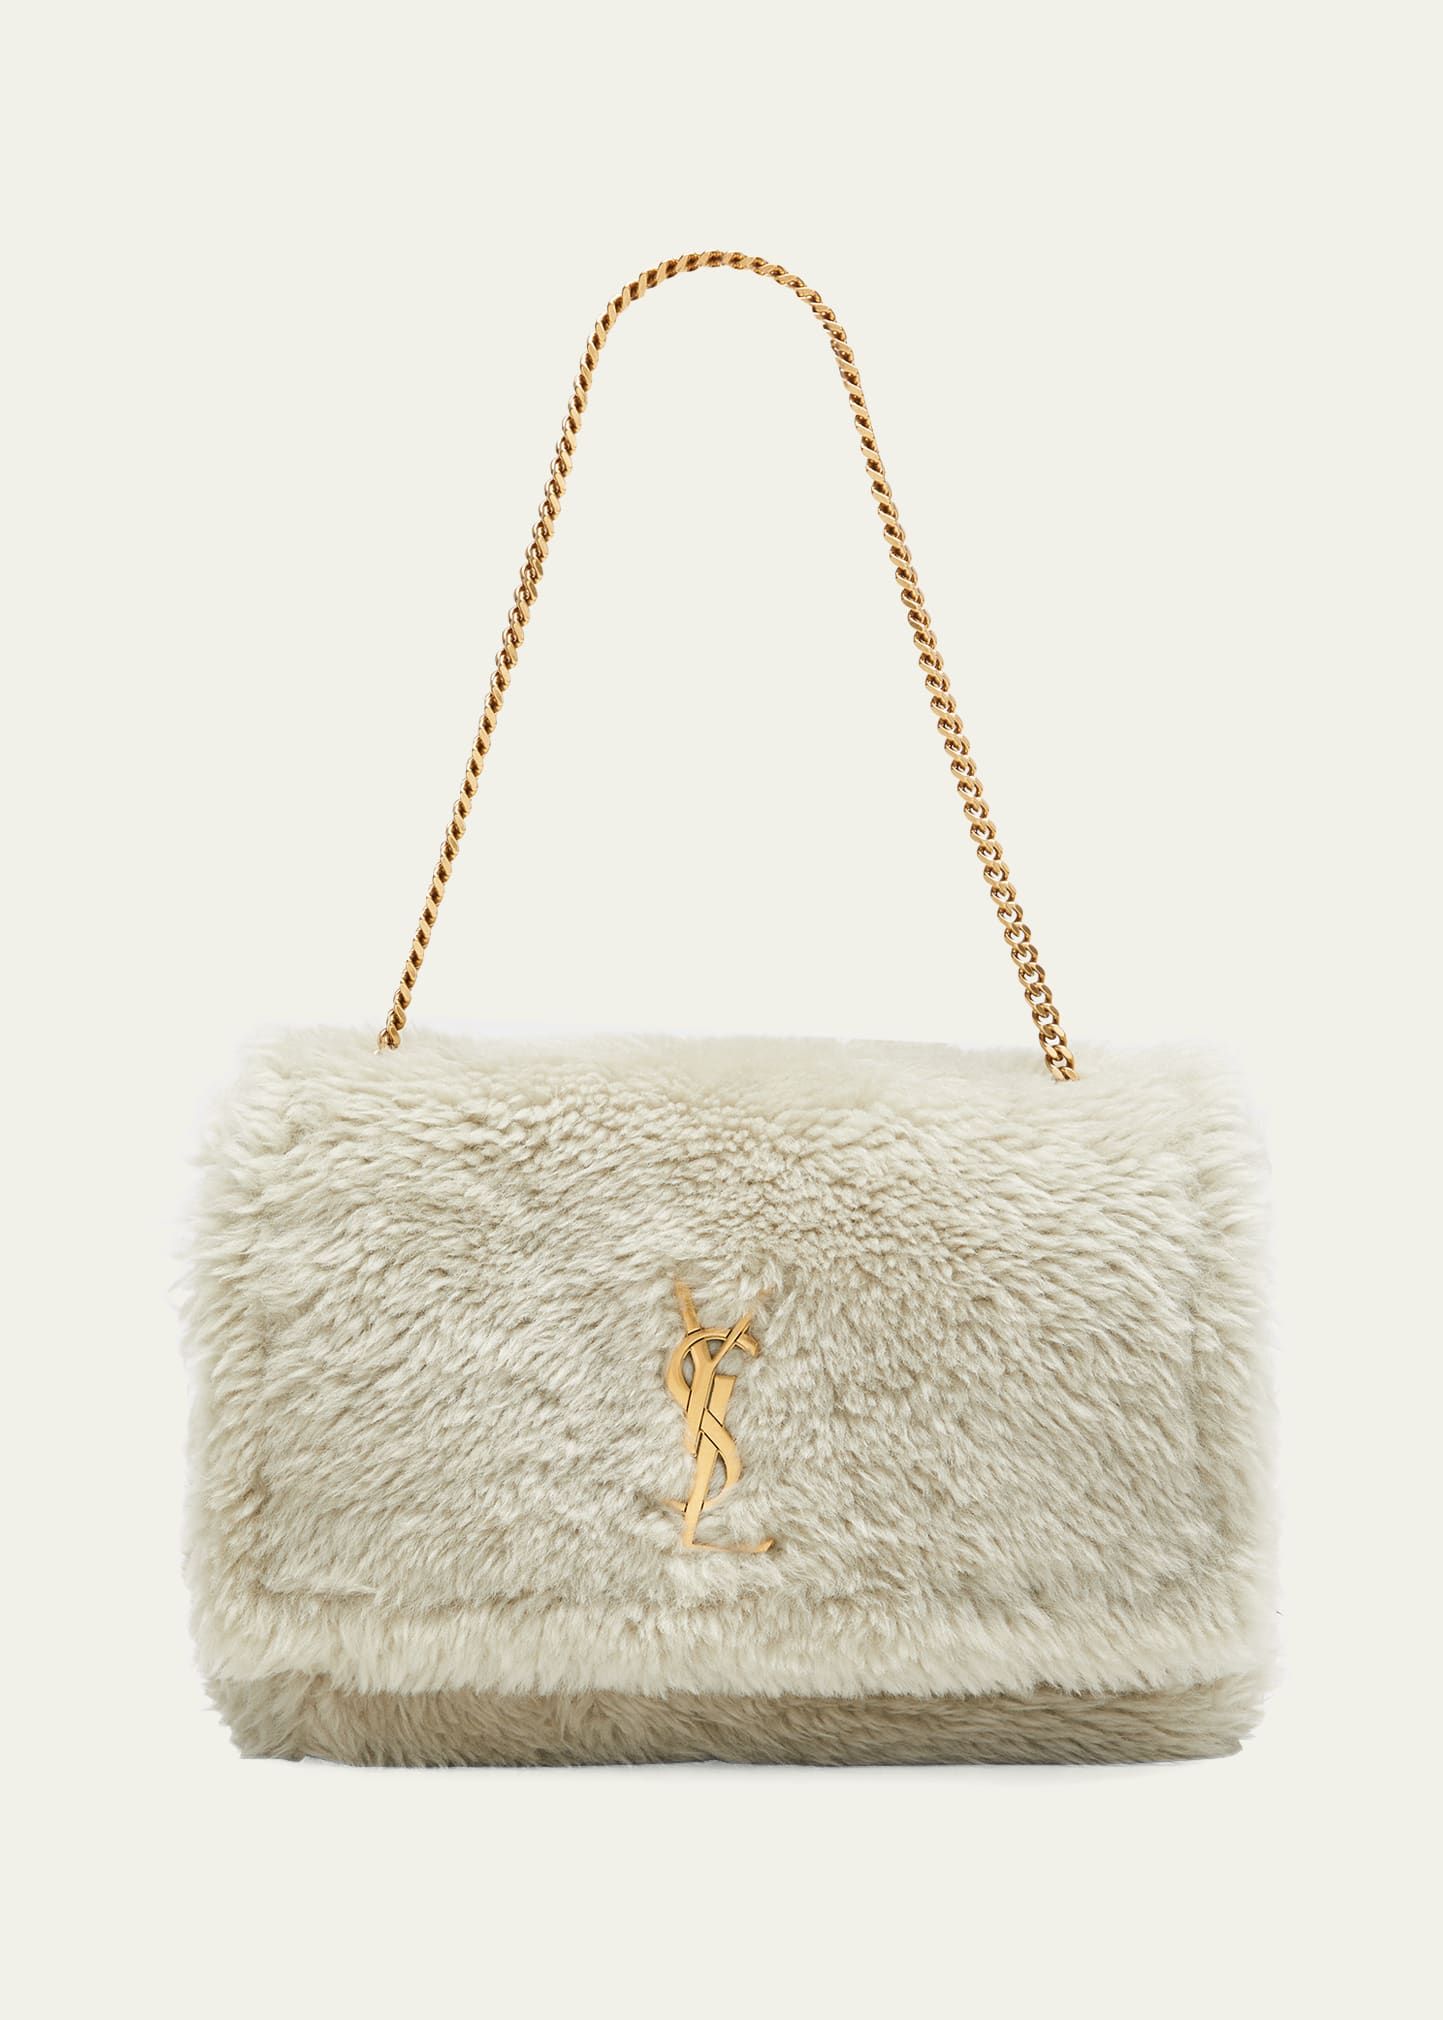 Timeless Elegance: YSL Bags for Every Fashionista